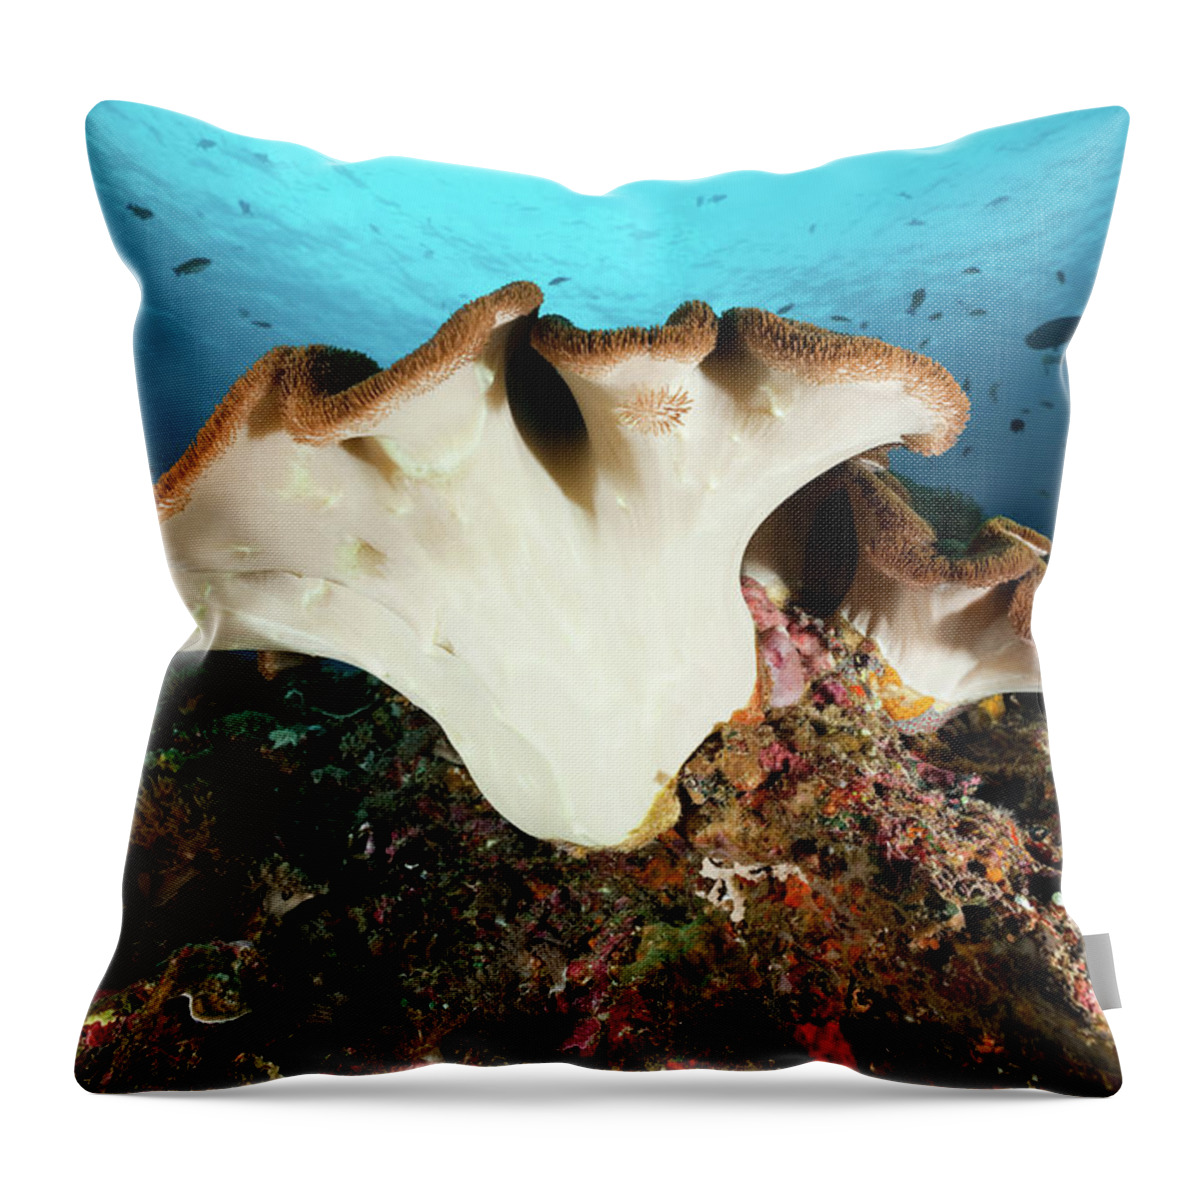 Underwater Throw Pillow featuring the photograph Beautiful Leather Coral At Crystal Bay by Ifish